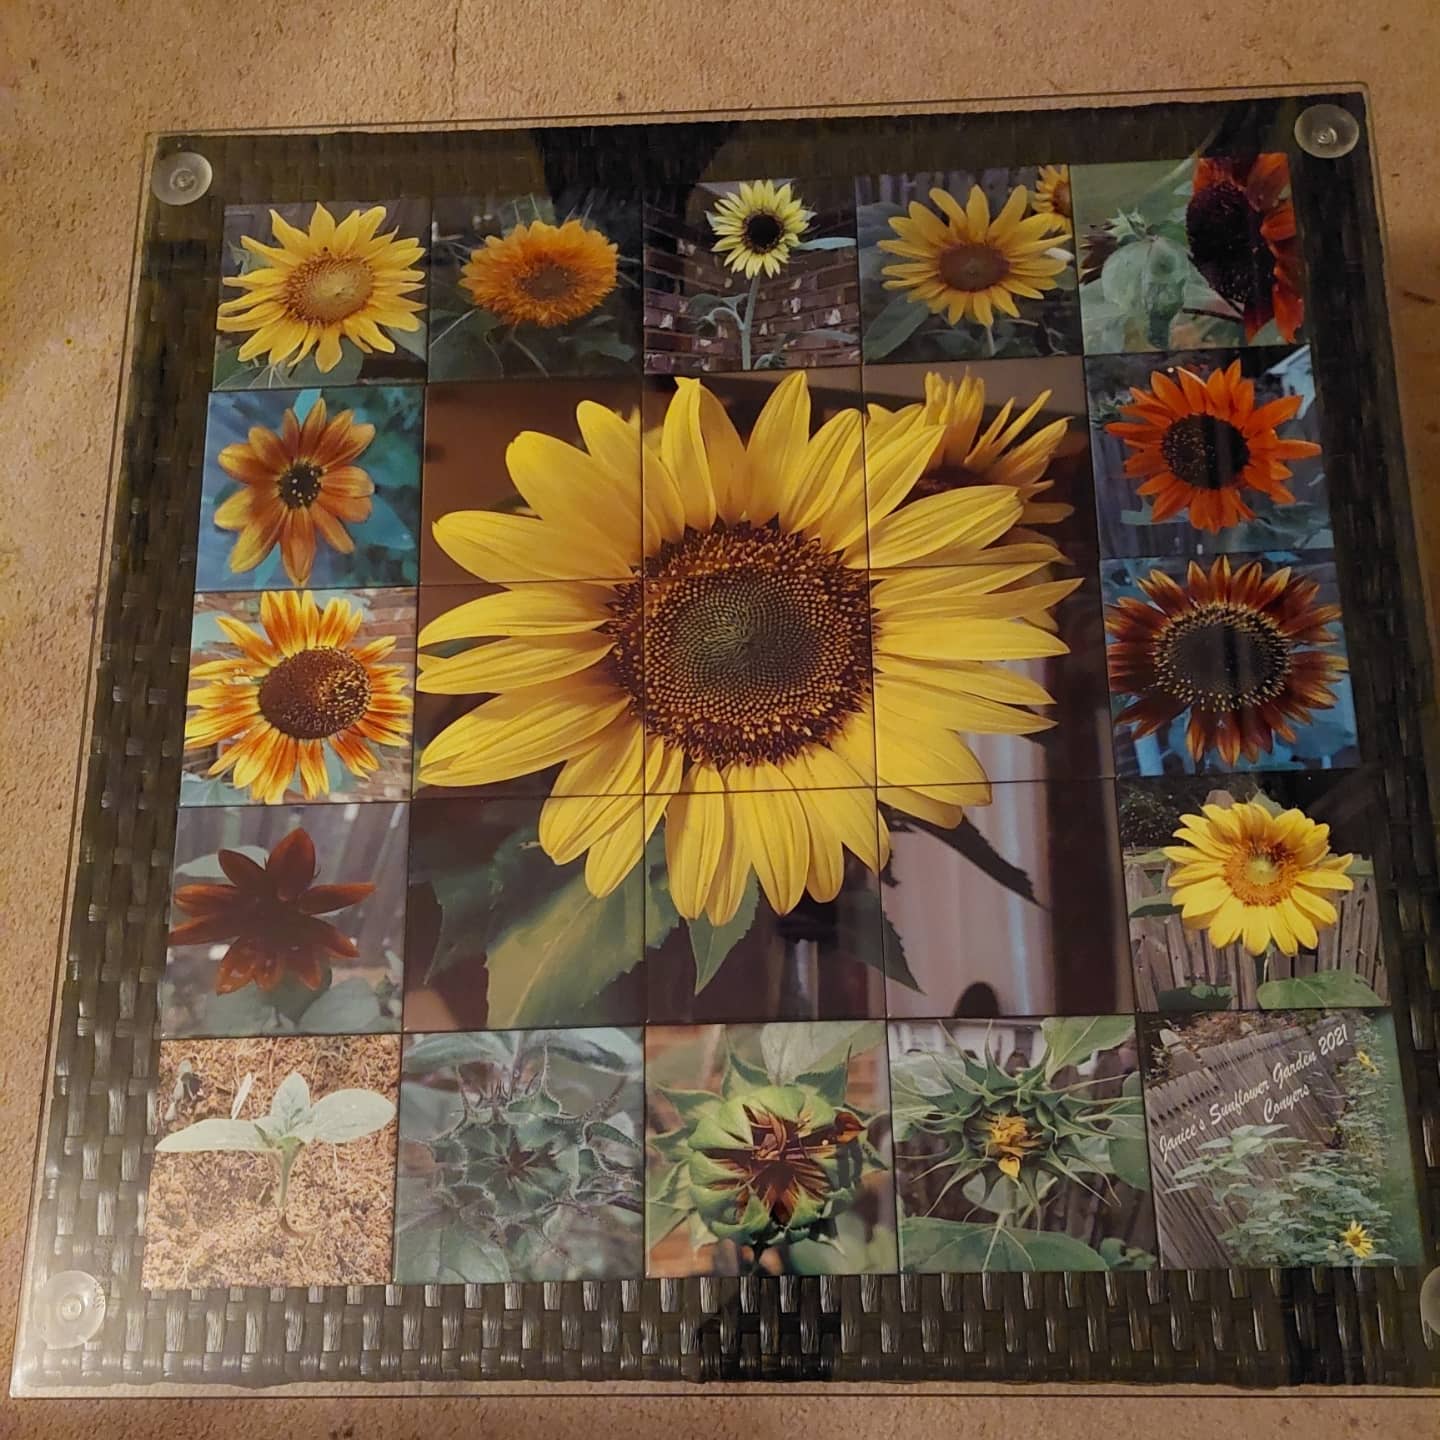 Janice's Sunflower Garden 2021 made with sublimation printing